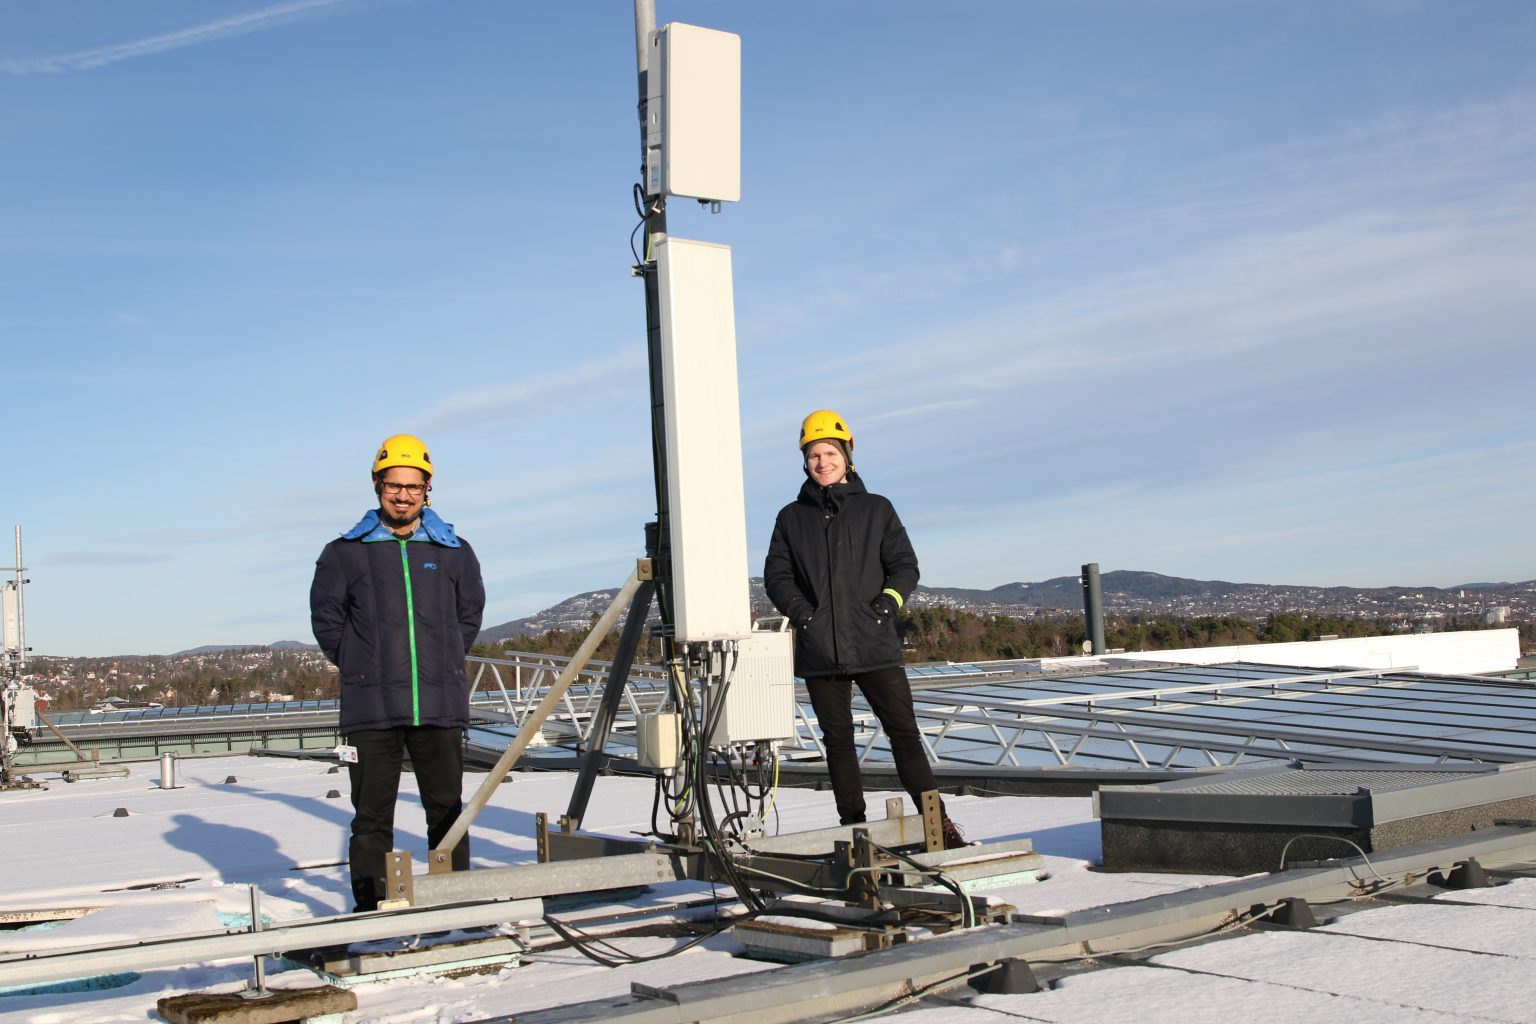 elenor Research’s Kashif Mahmood and Pål Grønsund standing next to the 5G base station at the 5G-VINNI experimentation facility site at Fornebu, Norway. The 5G-VINNI project’s objective is to accelerate the uptake of 5G in Europe.